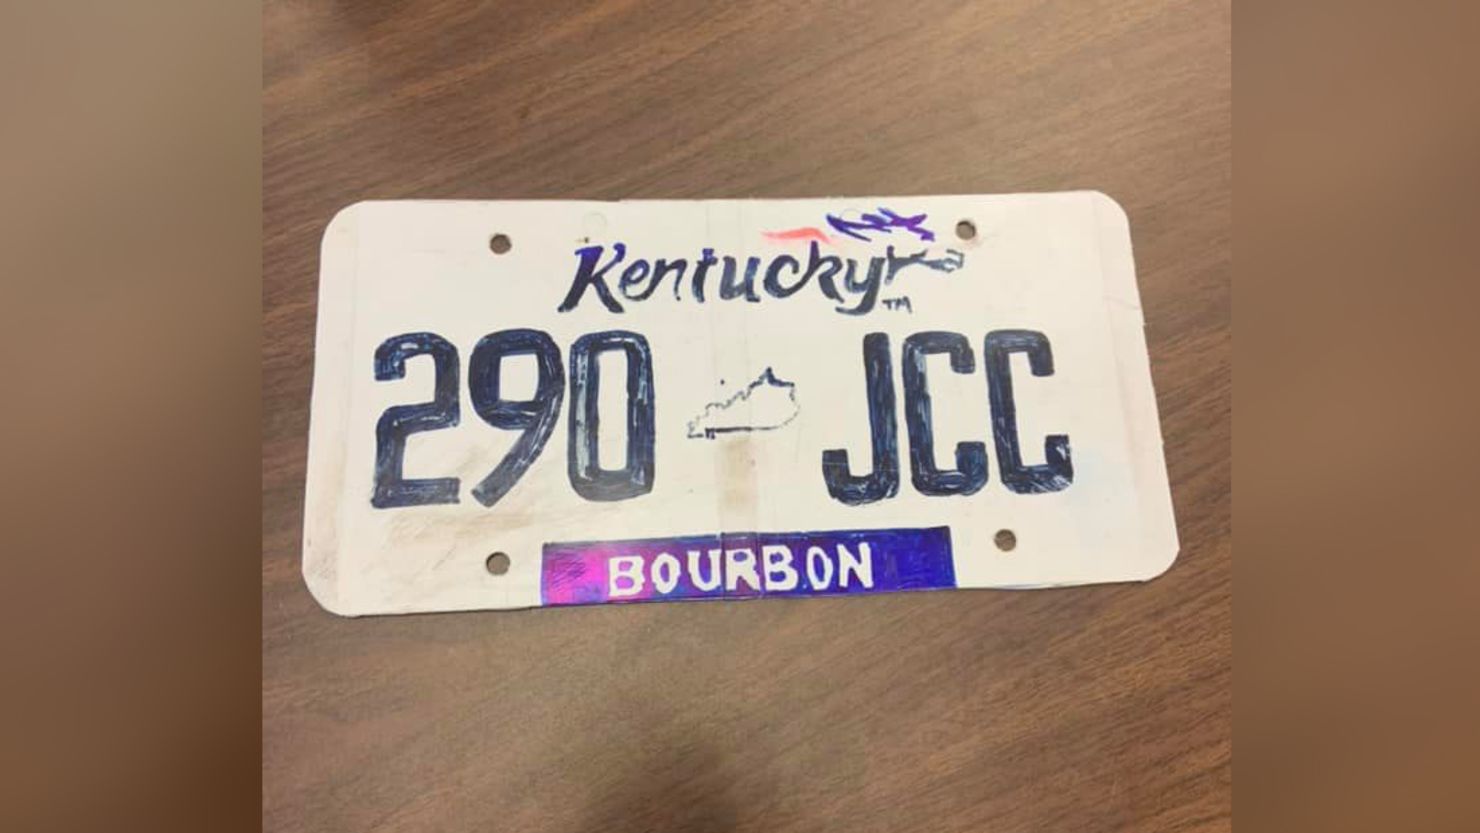 KY driver caught with homemade license plate